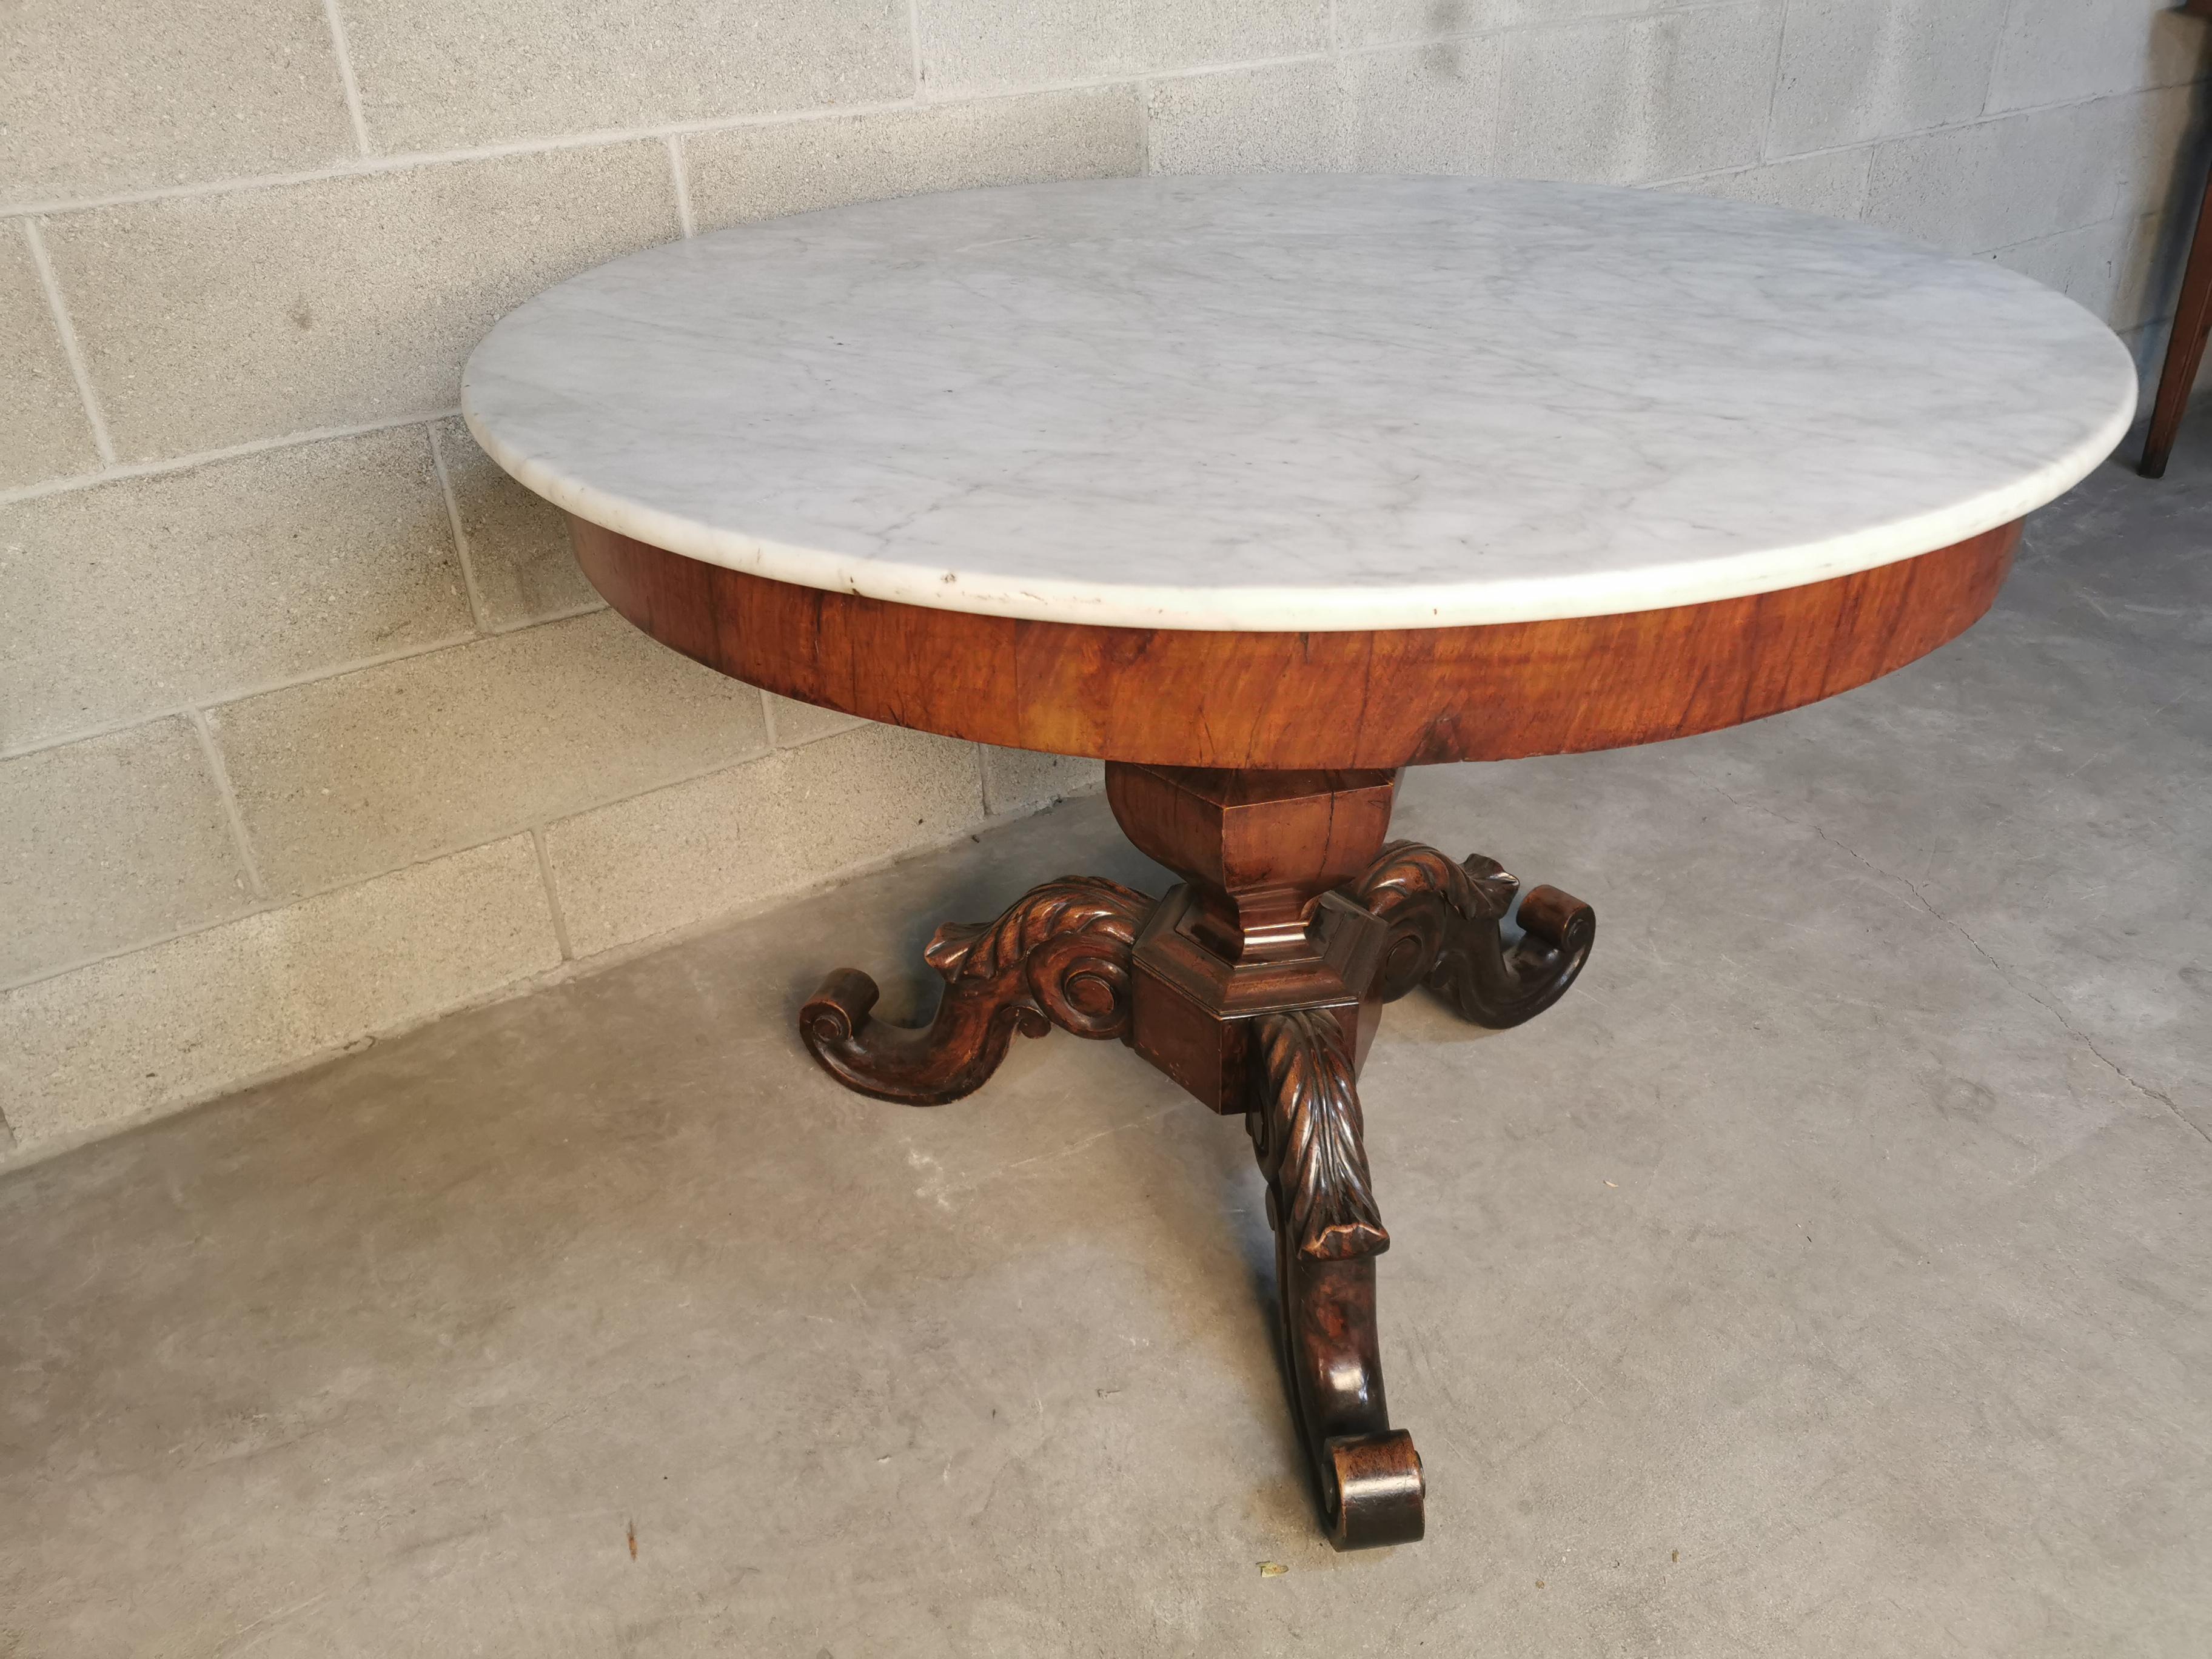 19th Century Round Dining Table with white marble top, Italian Carrara marble For Sale 2